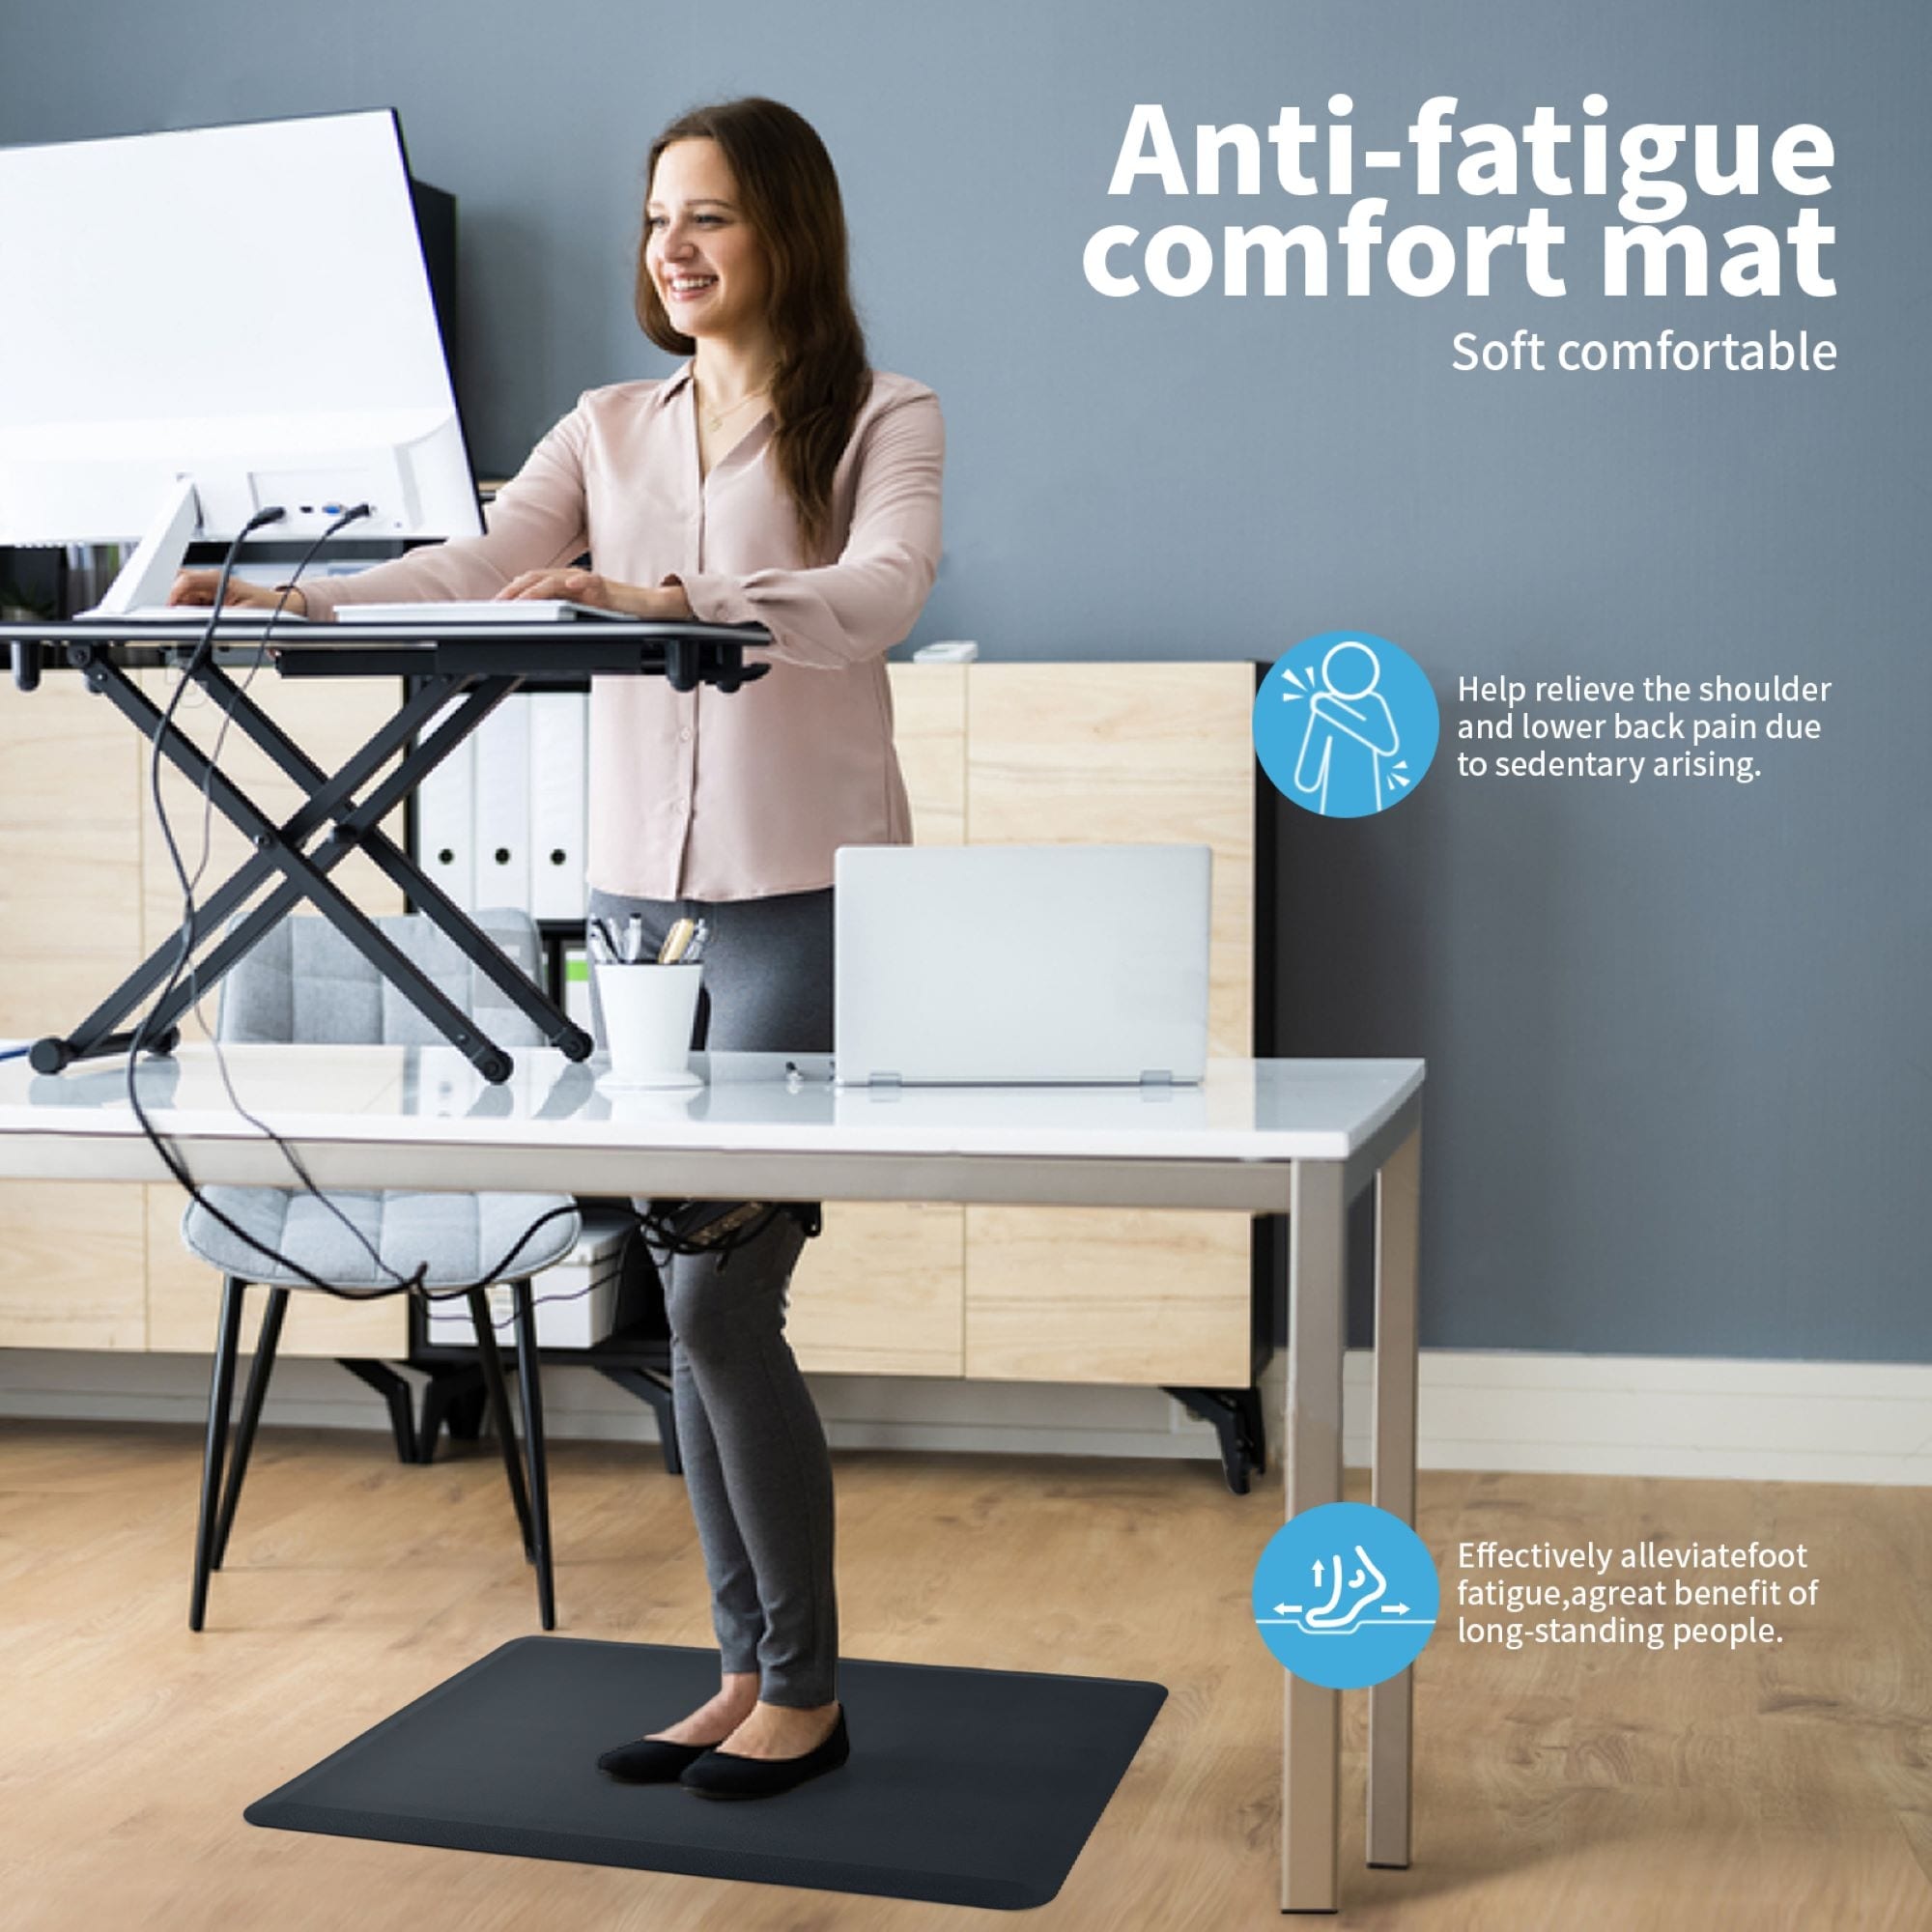 Standee Anti Fatigue Standing Mat, Padded Floor Mats for Standing- Thick  for Support and Comfort, 20 x 30 x 7/8 in. - Designed for Office, Kitchen